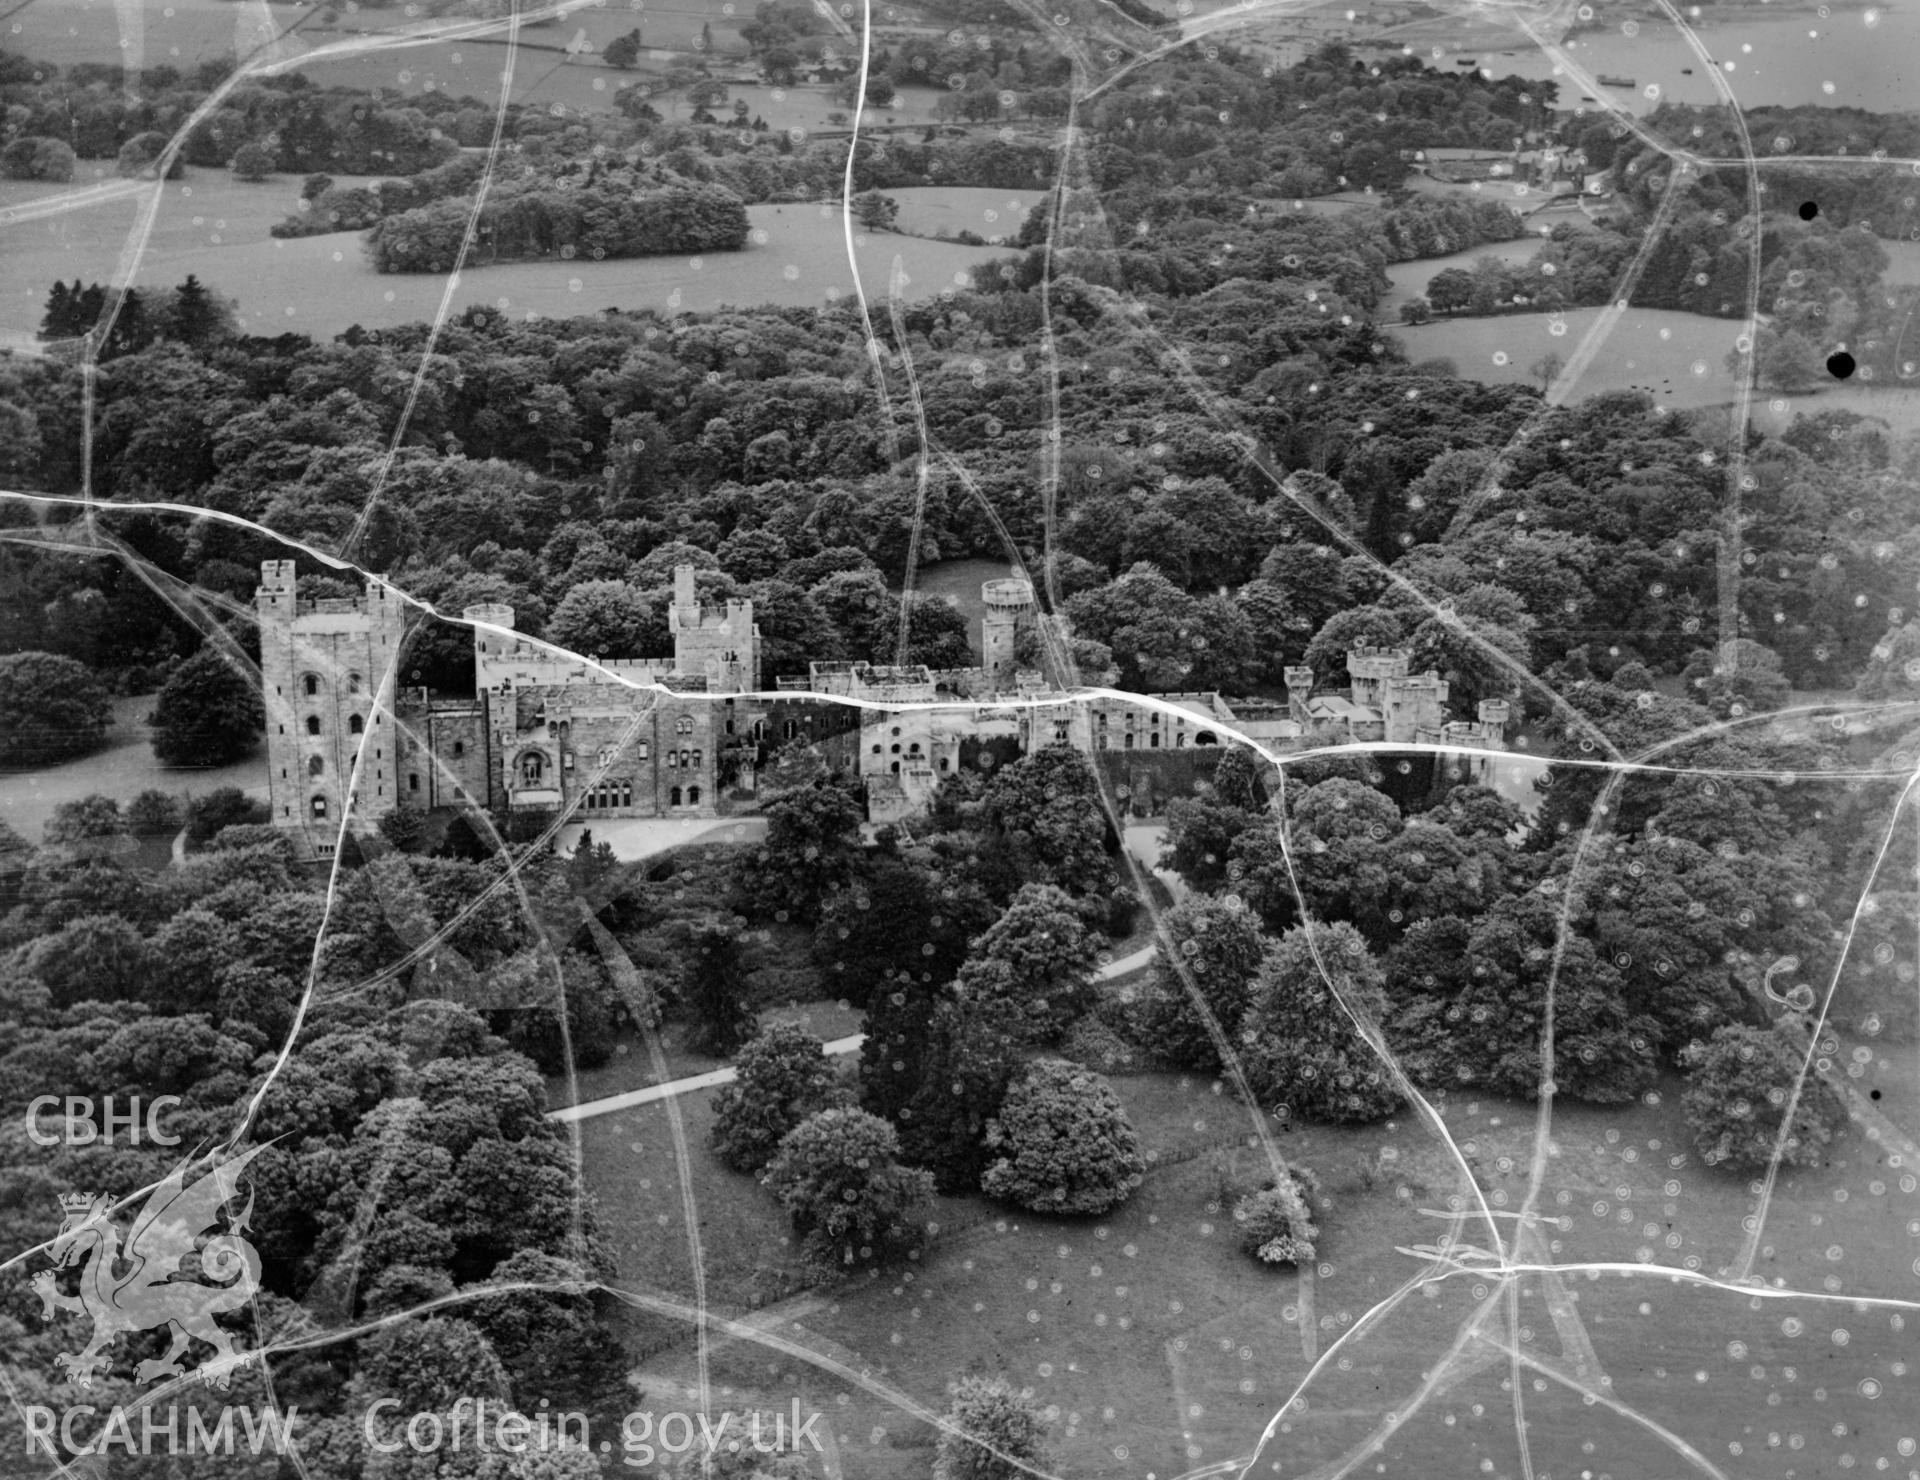 General view of Penryn Castle, Bangor. Oblique aerial photograph, 5?x4? BW glass plate.